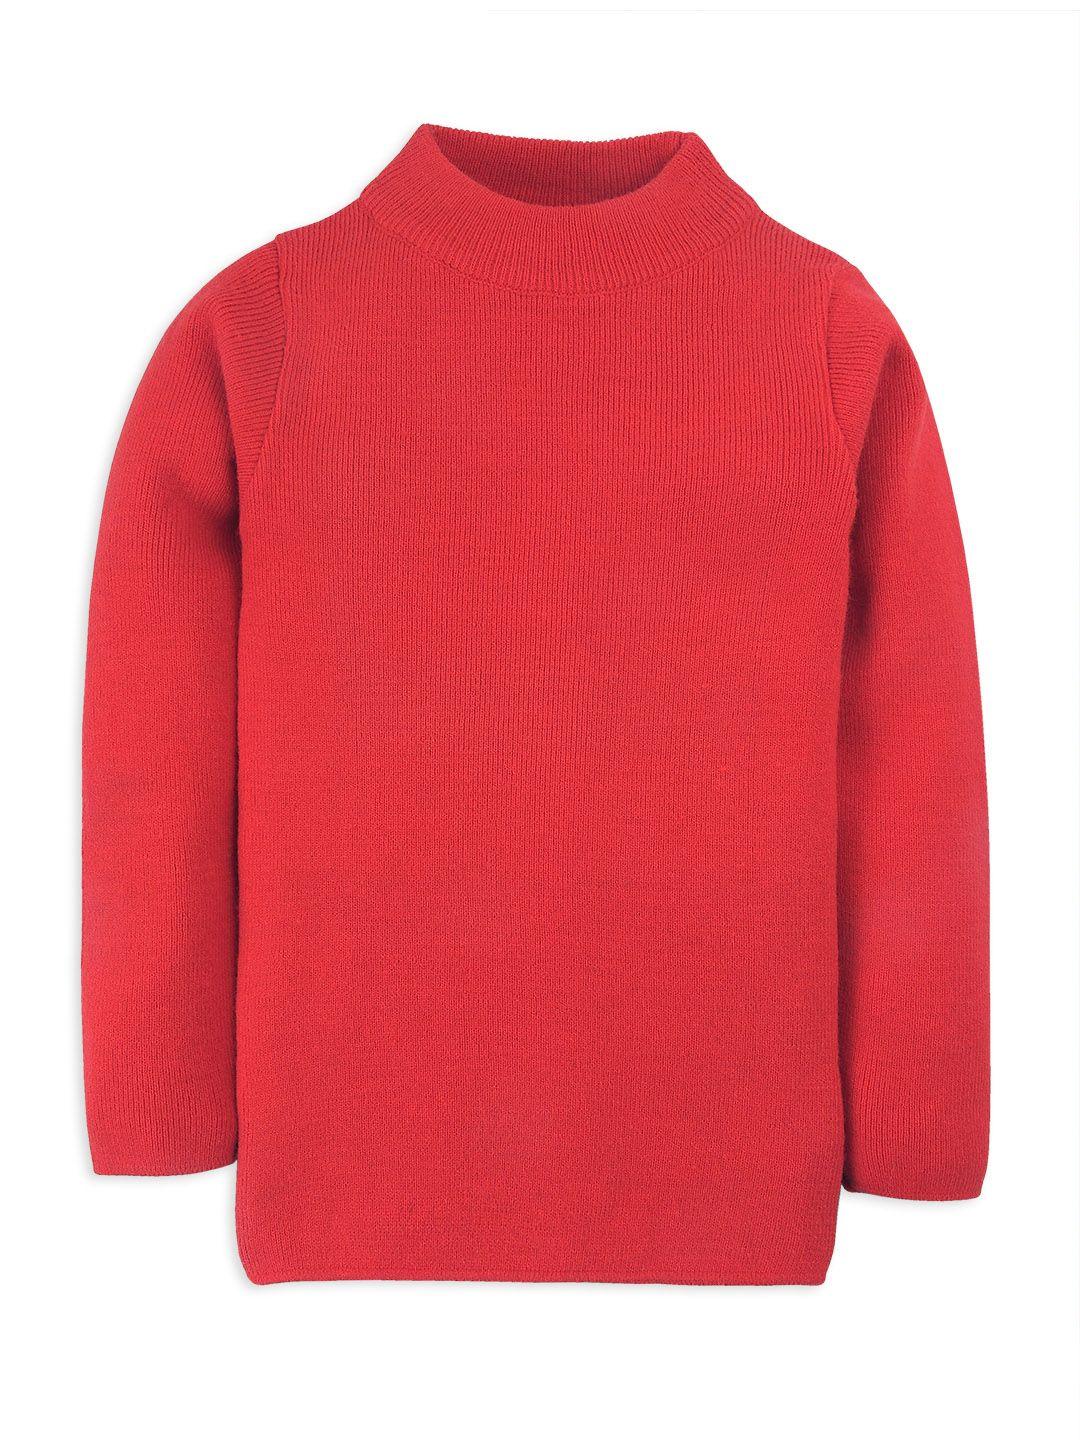 rvk unisex red solid acrylic sweater